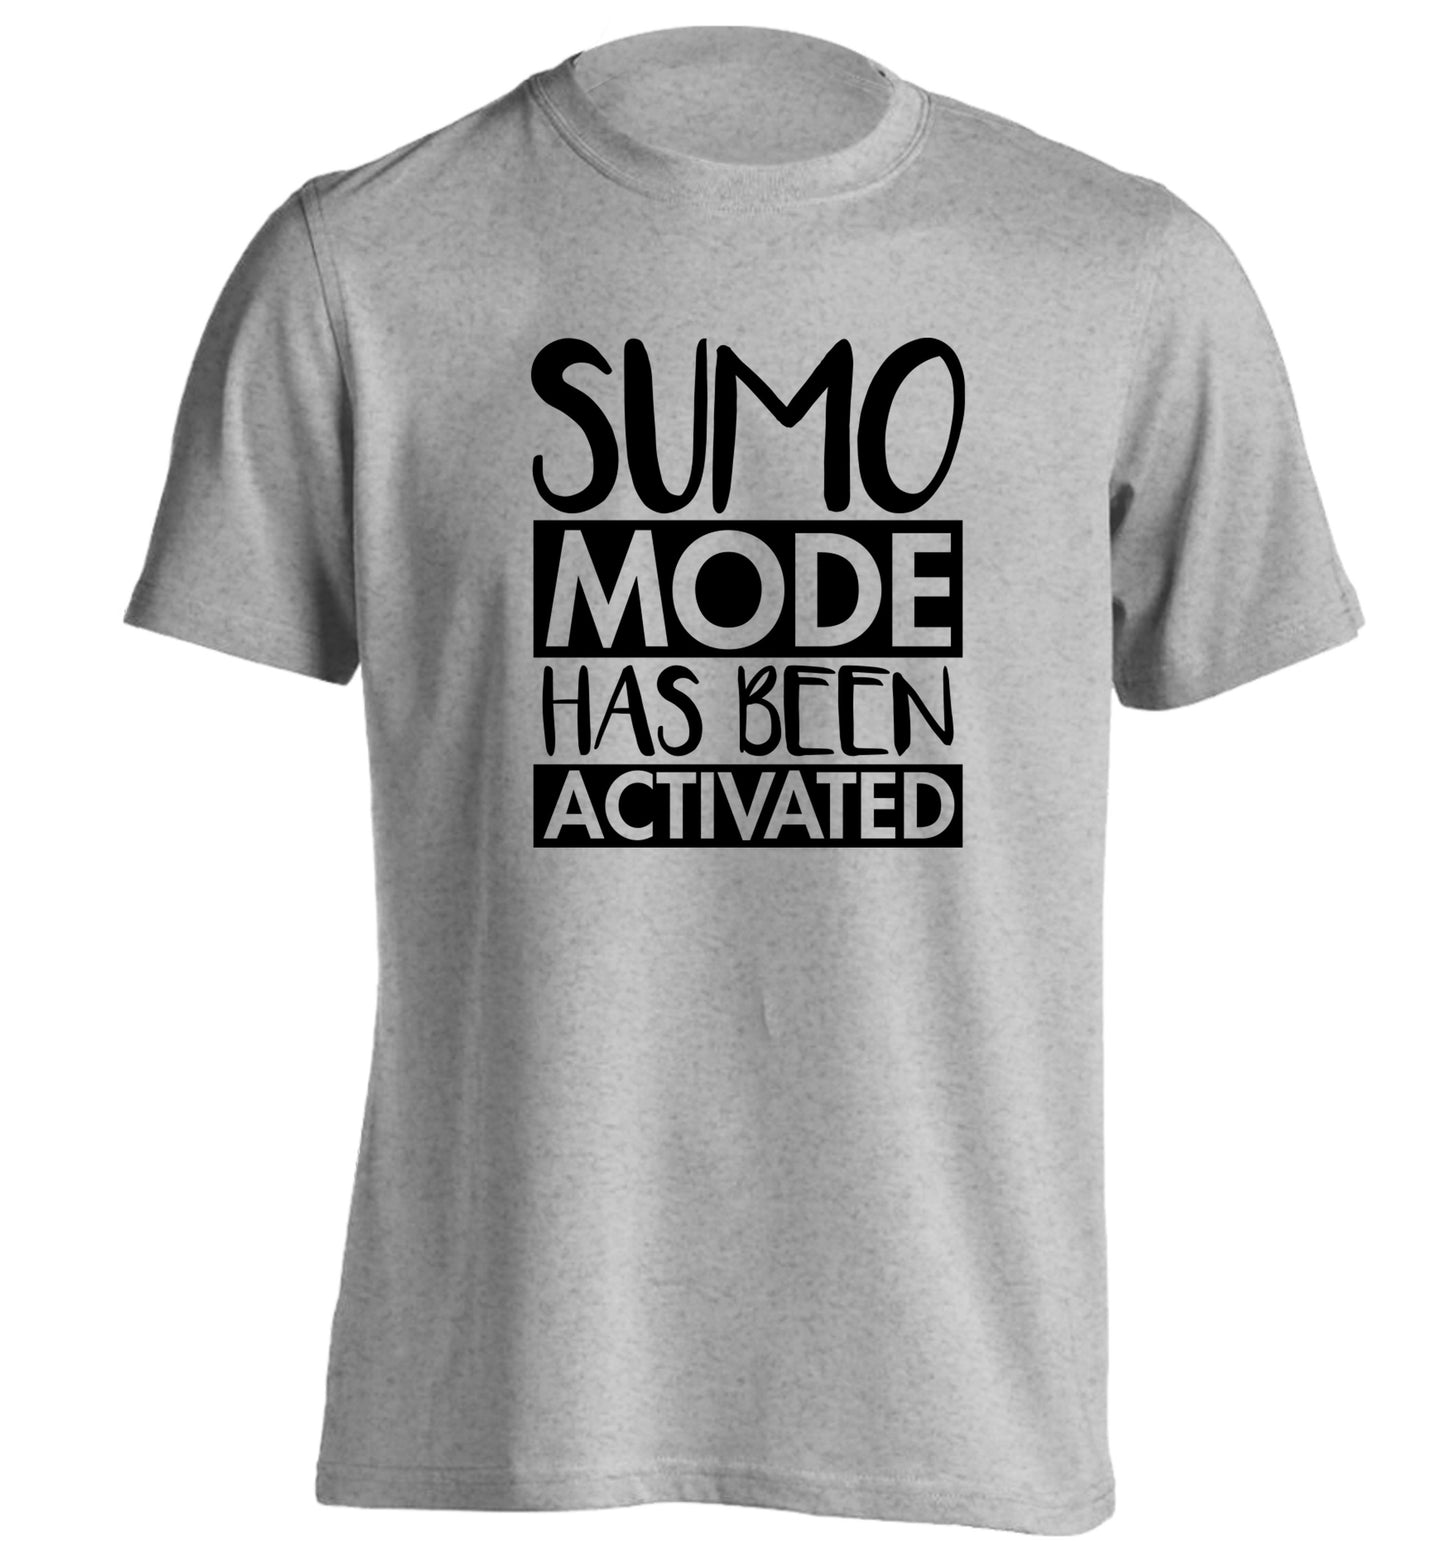 Sumo mode activated adults unisex grey Tshirt 2XL